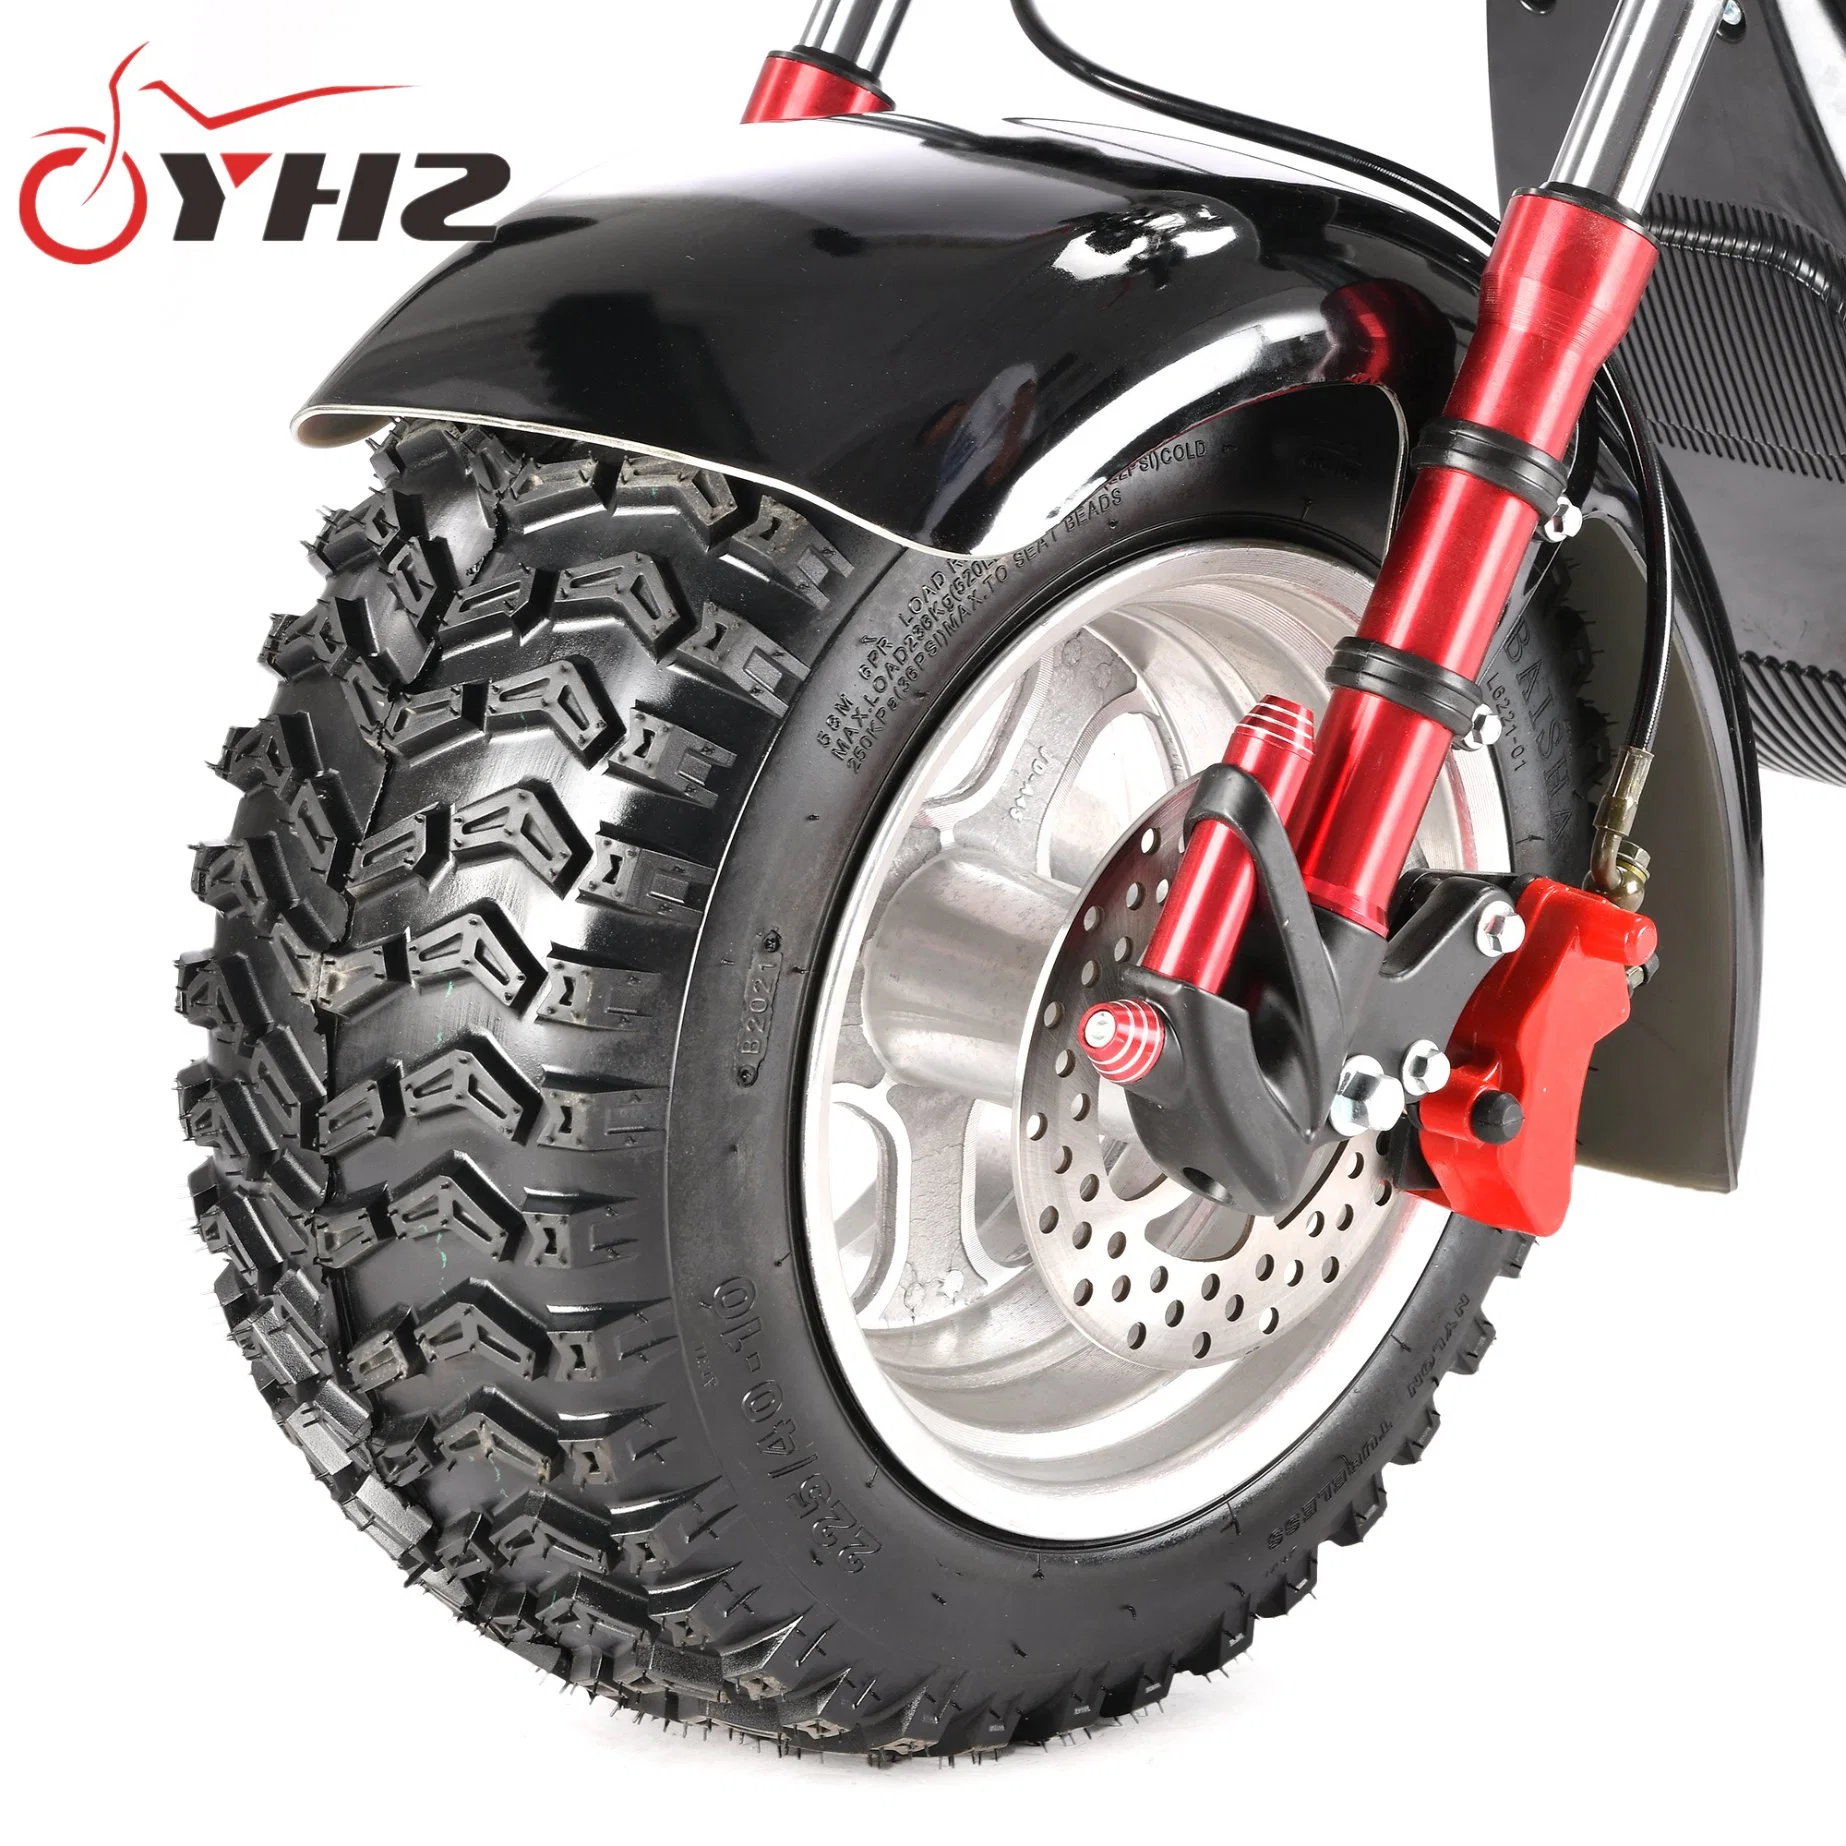 Cp-7 Parts of Electric Bike with Only off-Road Wheels